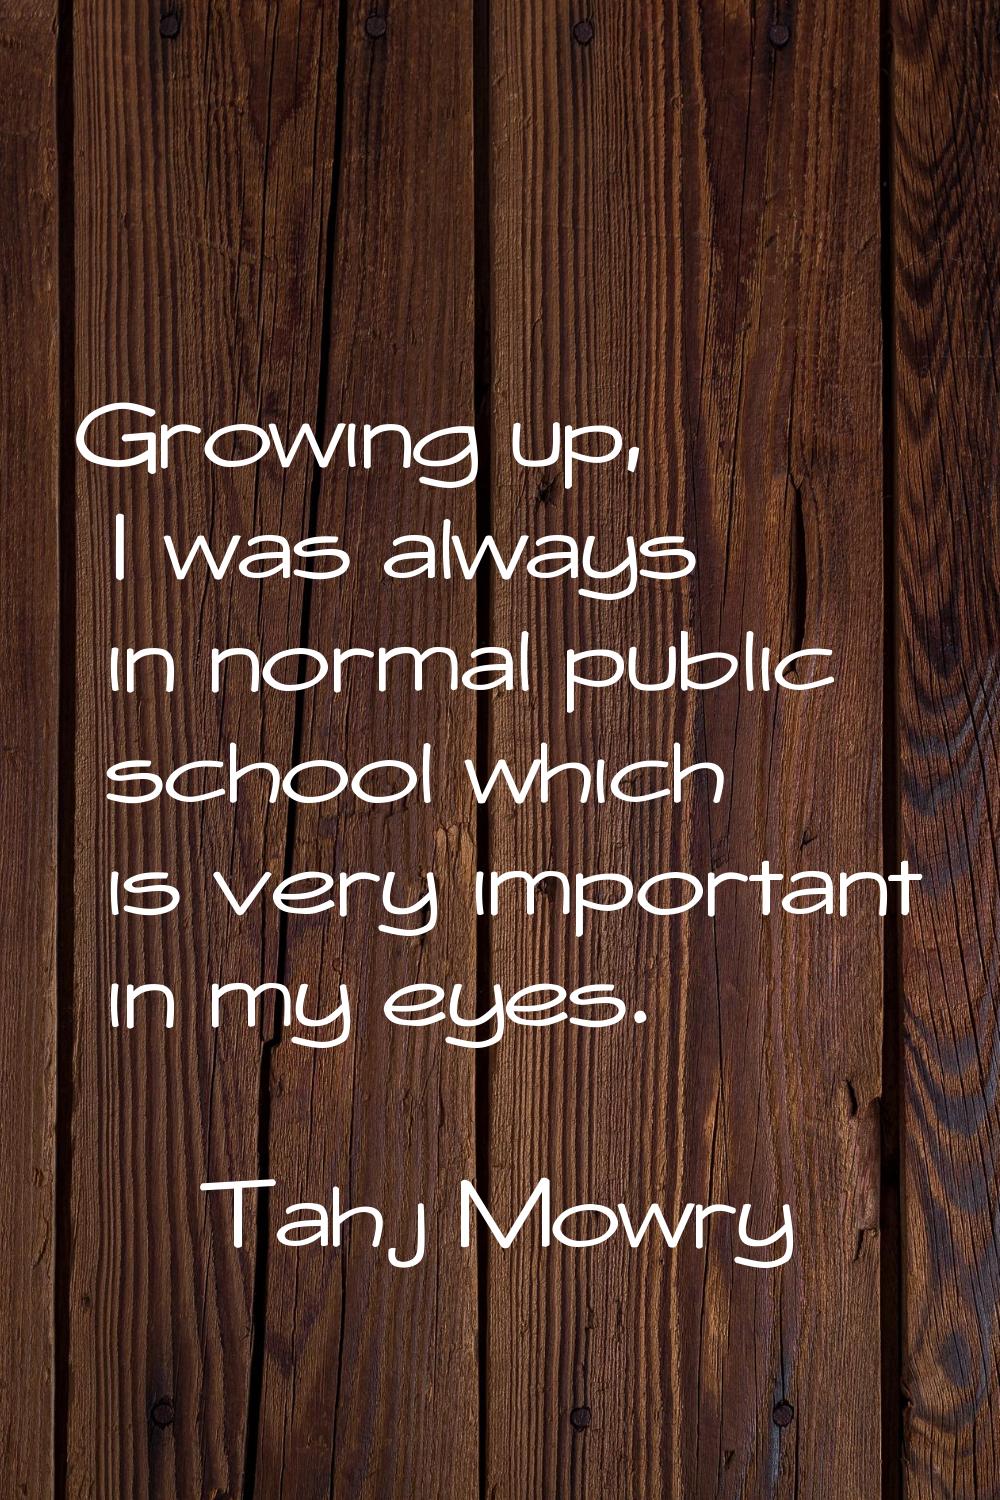 Growing up, I was always in normal public school which is very important in my eyes.